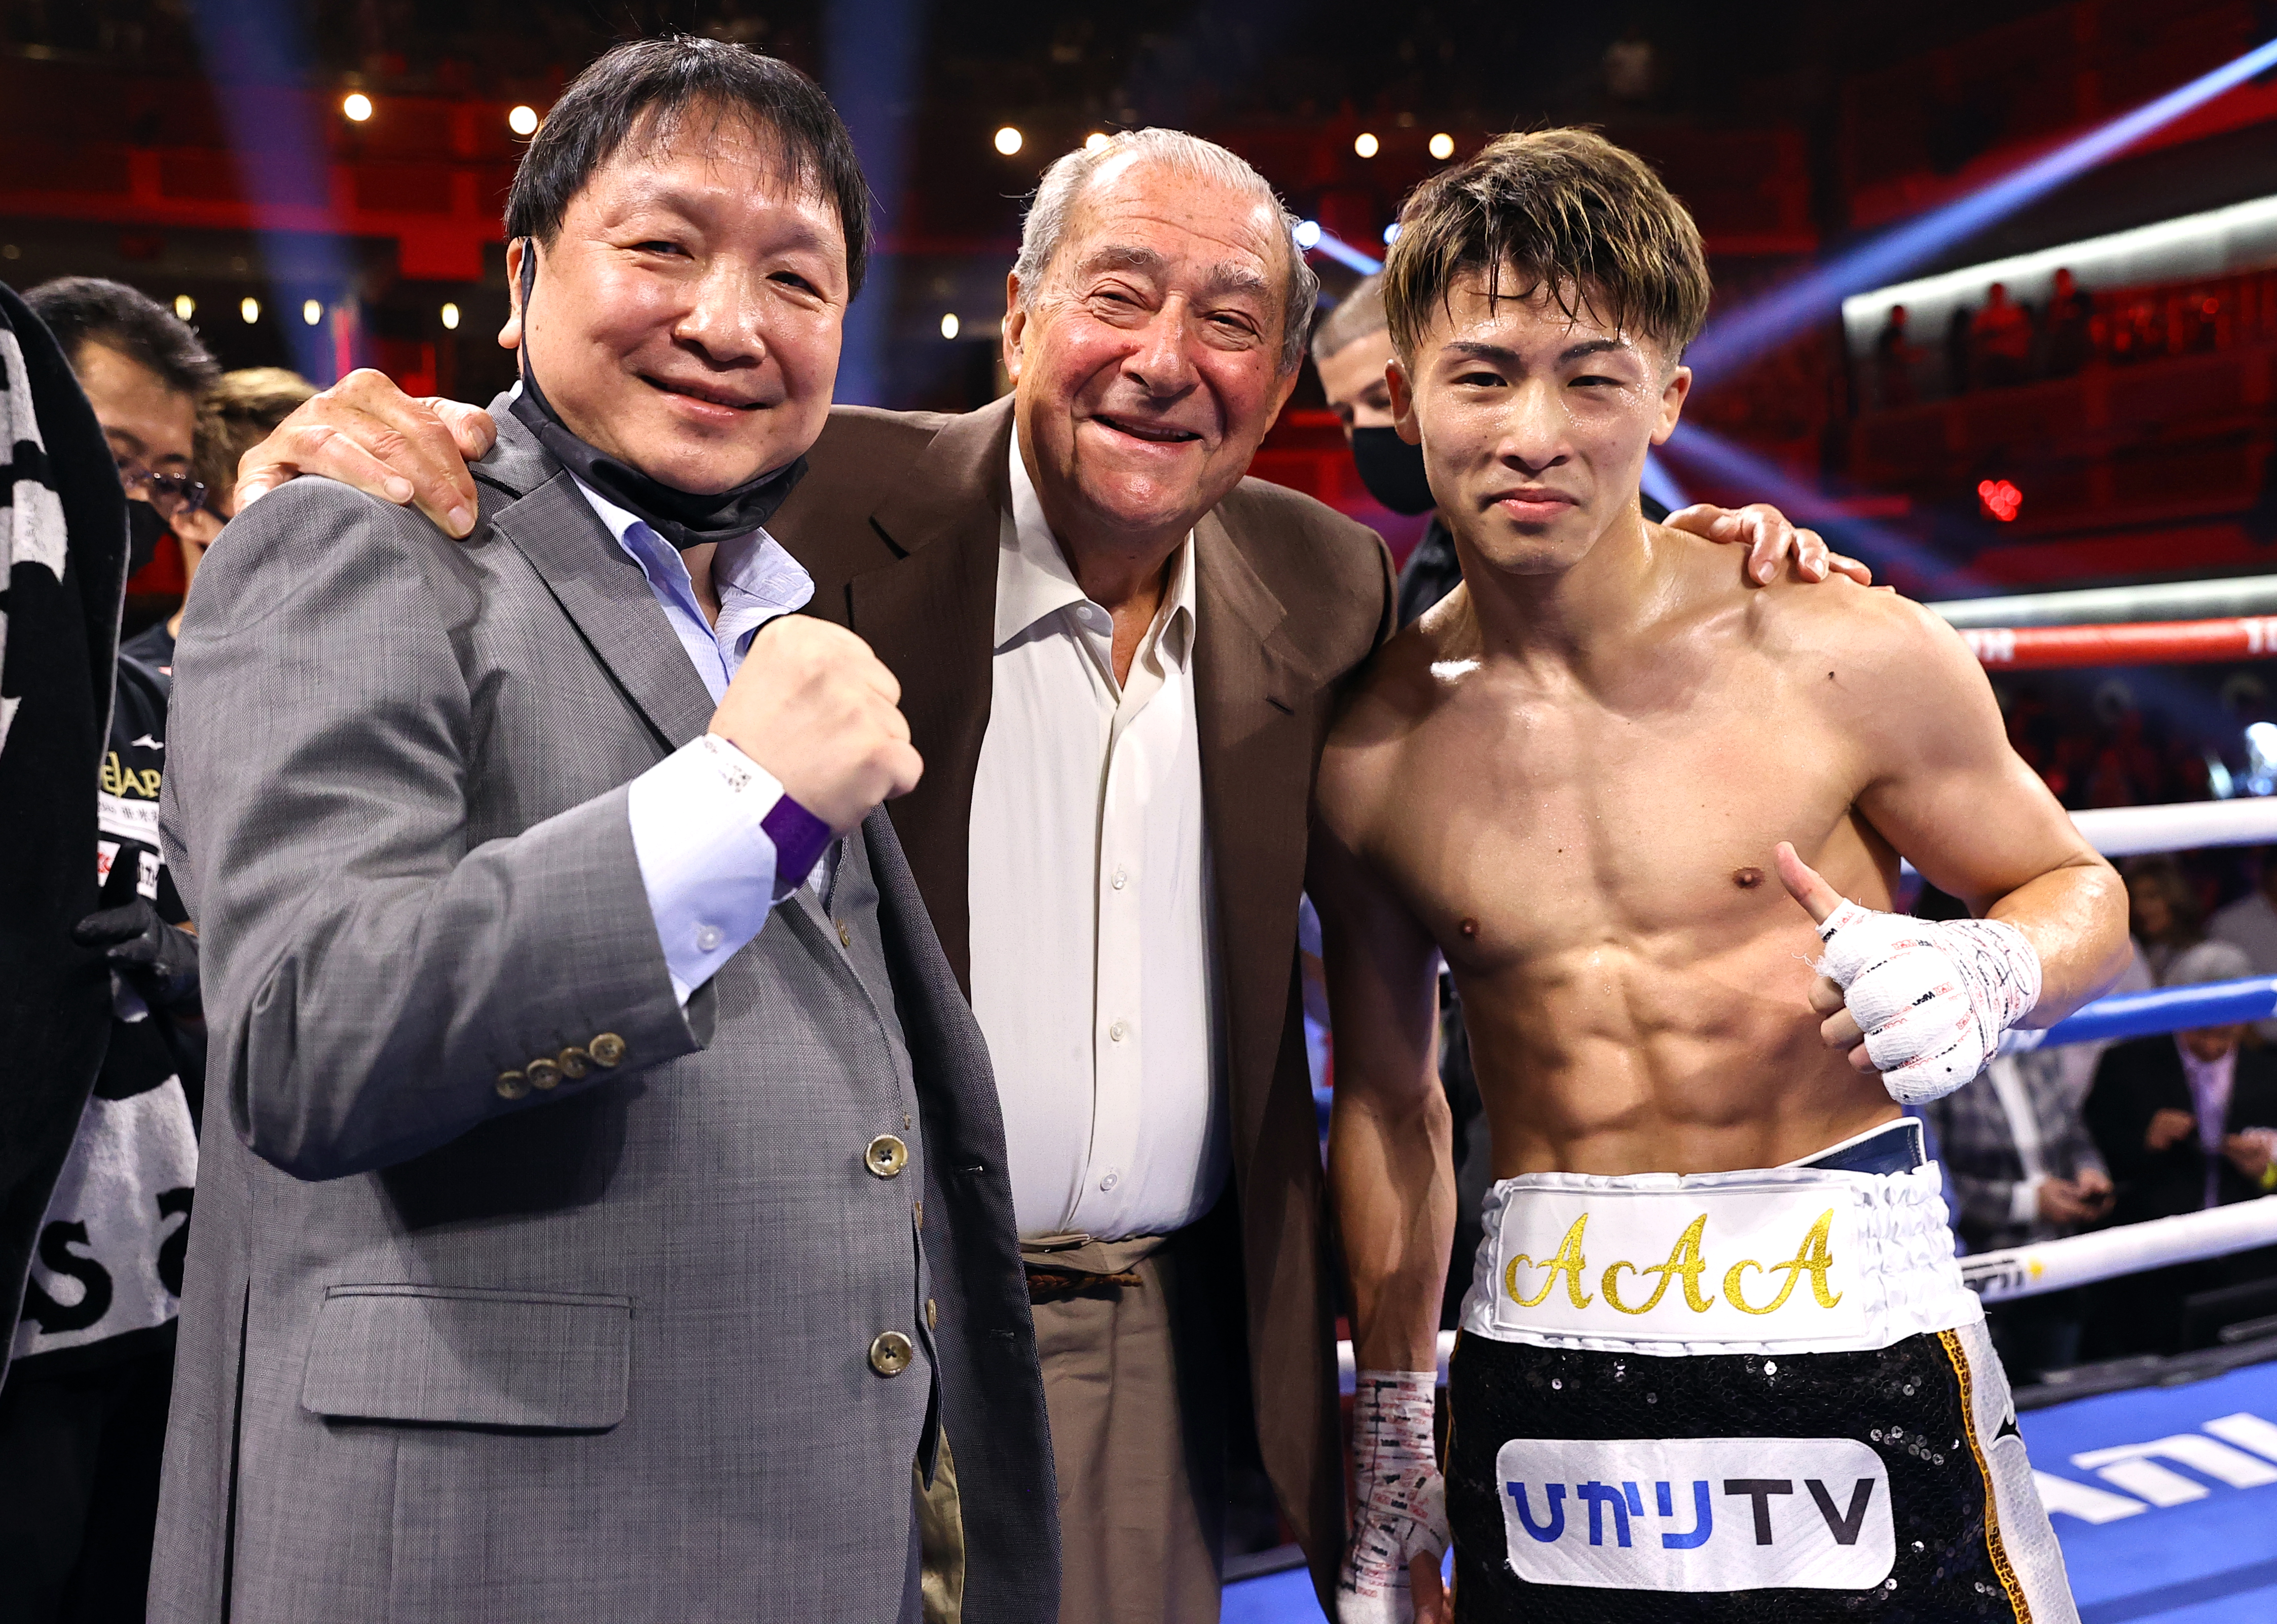 Bob Arum says he expects Inoue vs Fulton to get done soon, plus Haney-Lomachenko and more